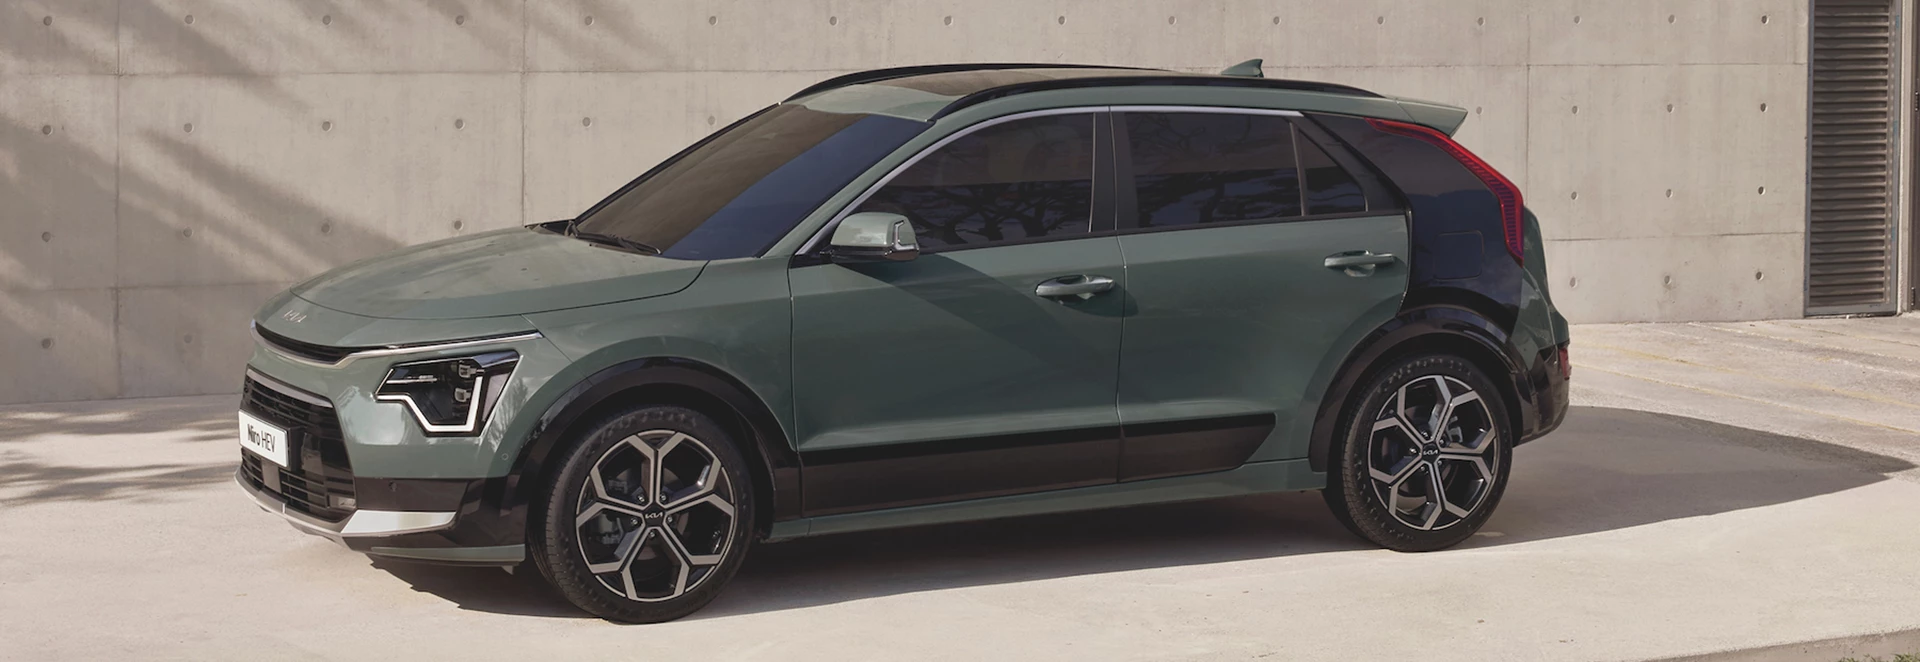 2022 Kia Niro unveiled with sharp new look and emphasis on sustainability 